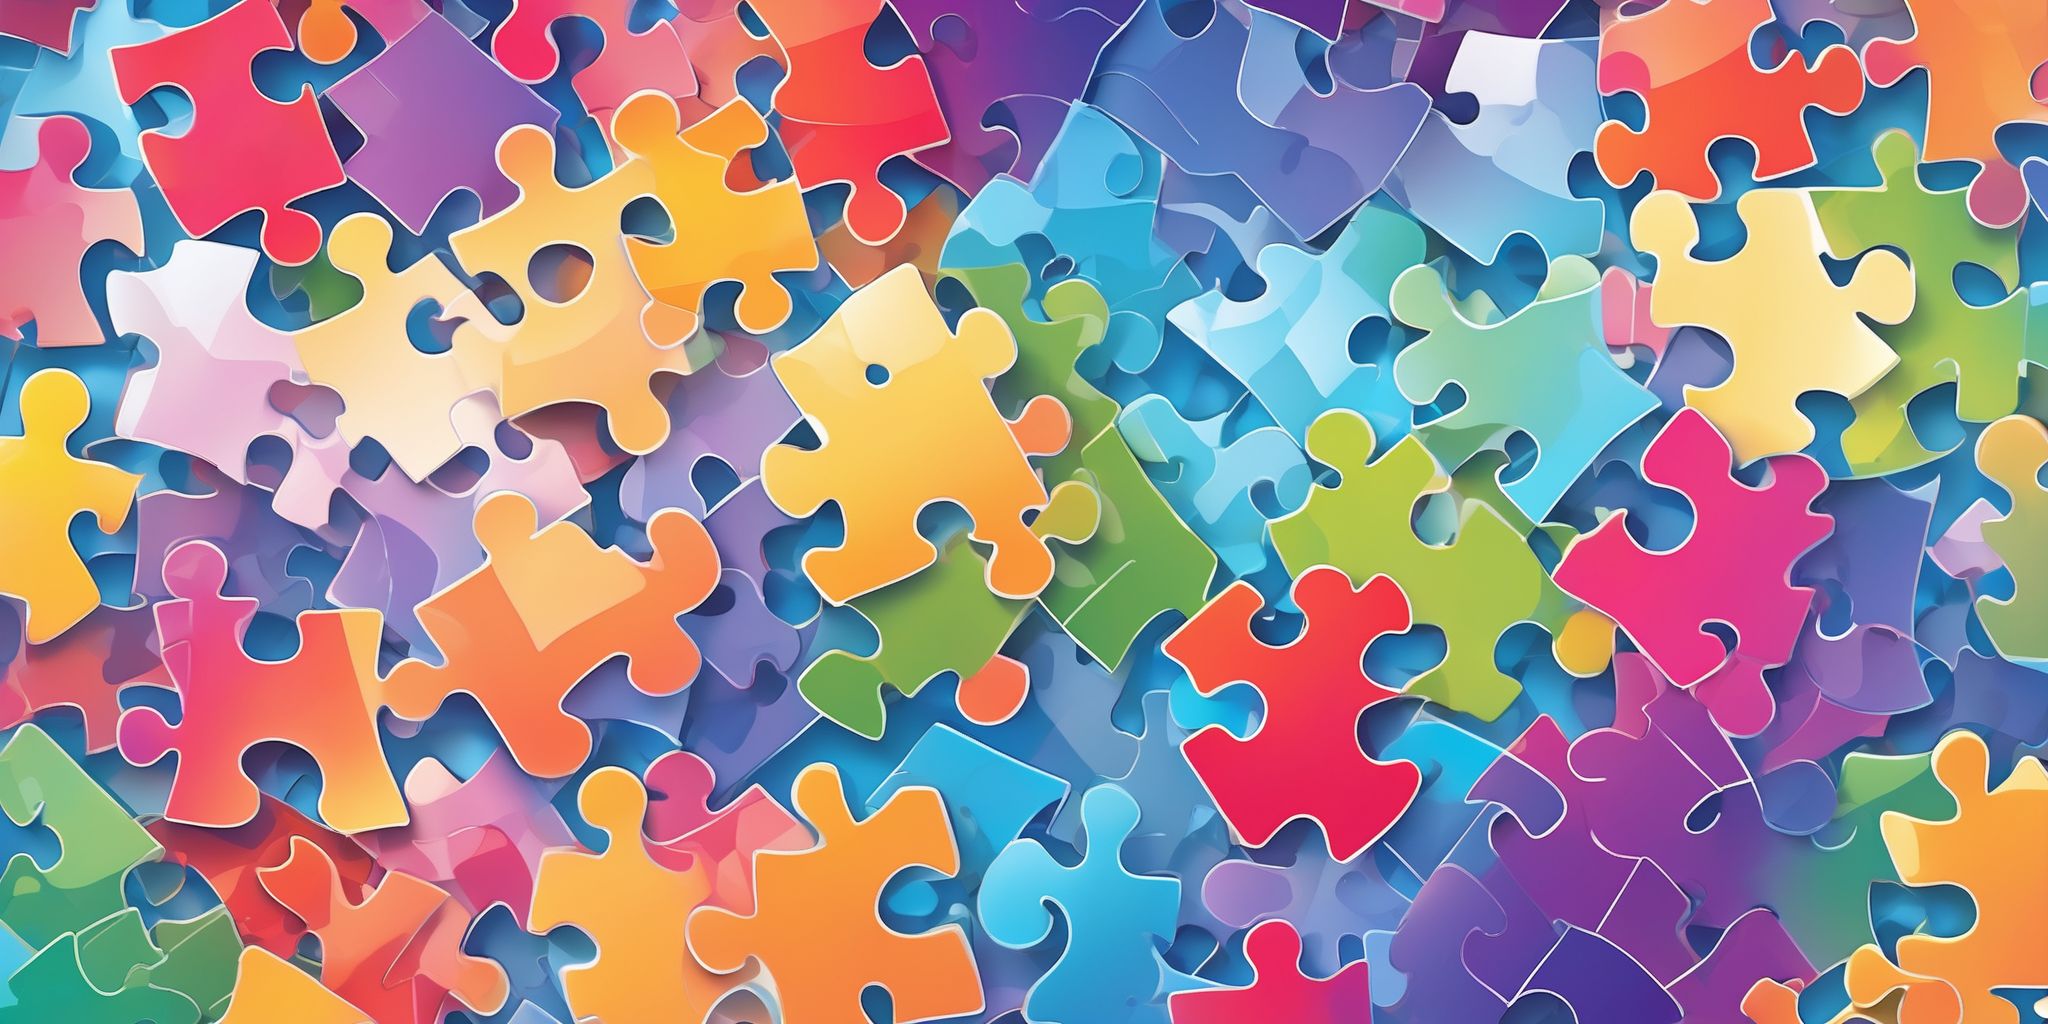 Puzzle pieces in illustration style with gradients and white background